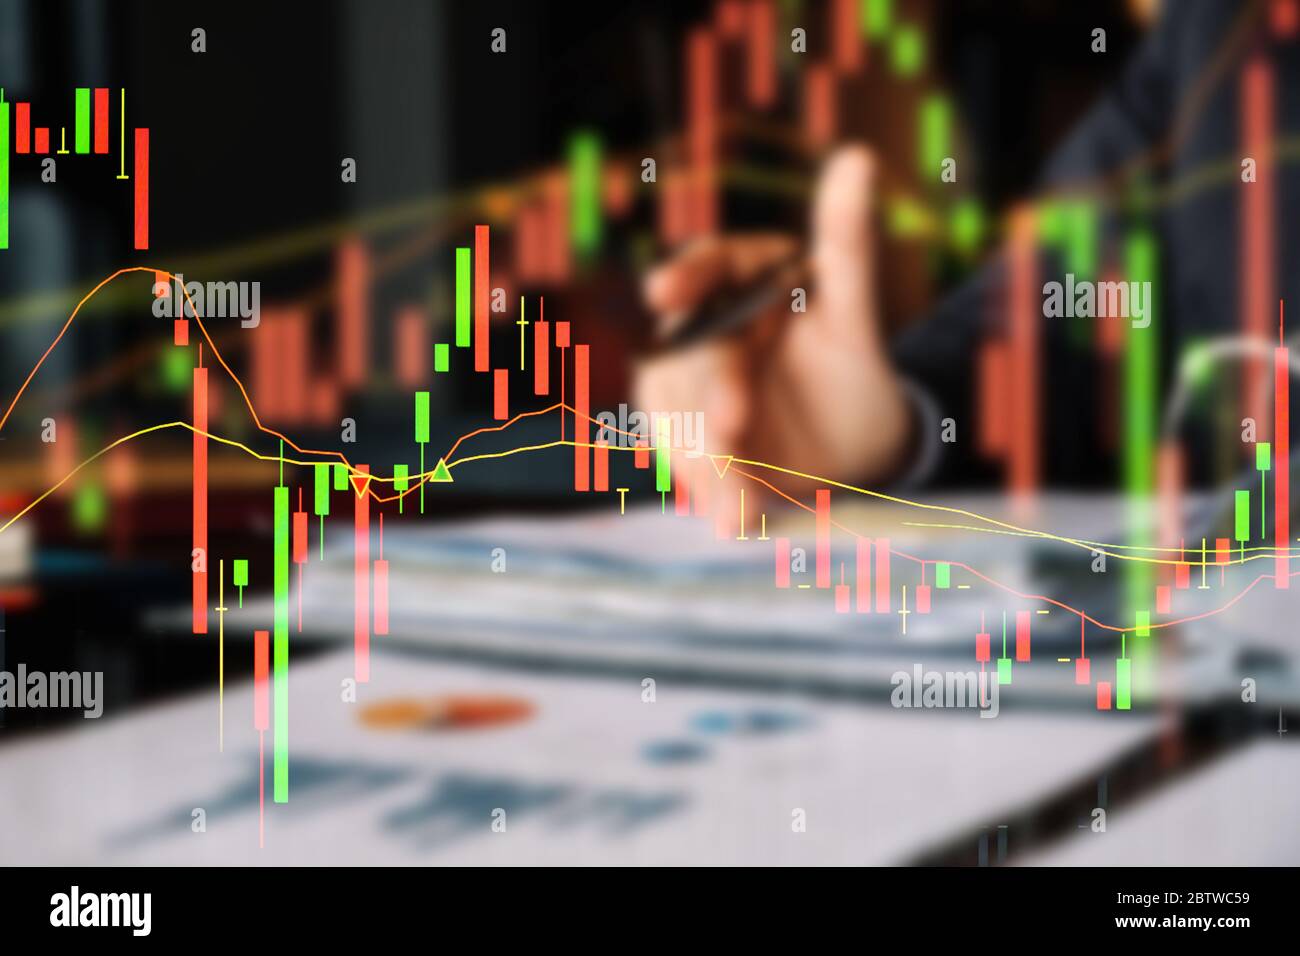 Stock market chart, Stock market data with businesswoman working with financial blur background Stock Photo